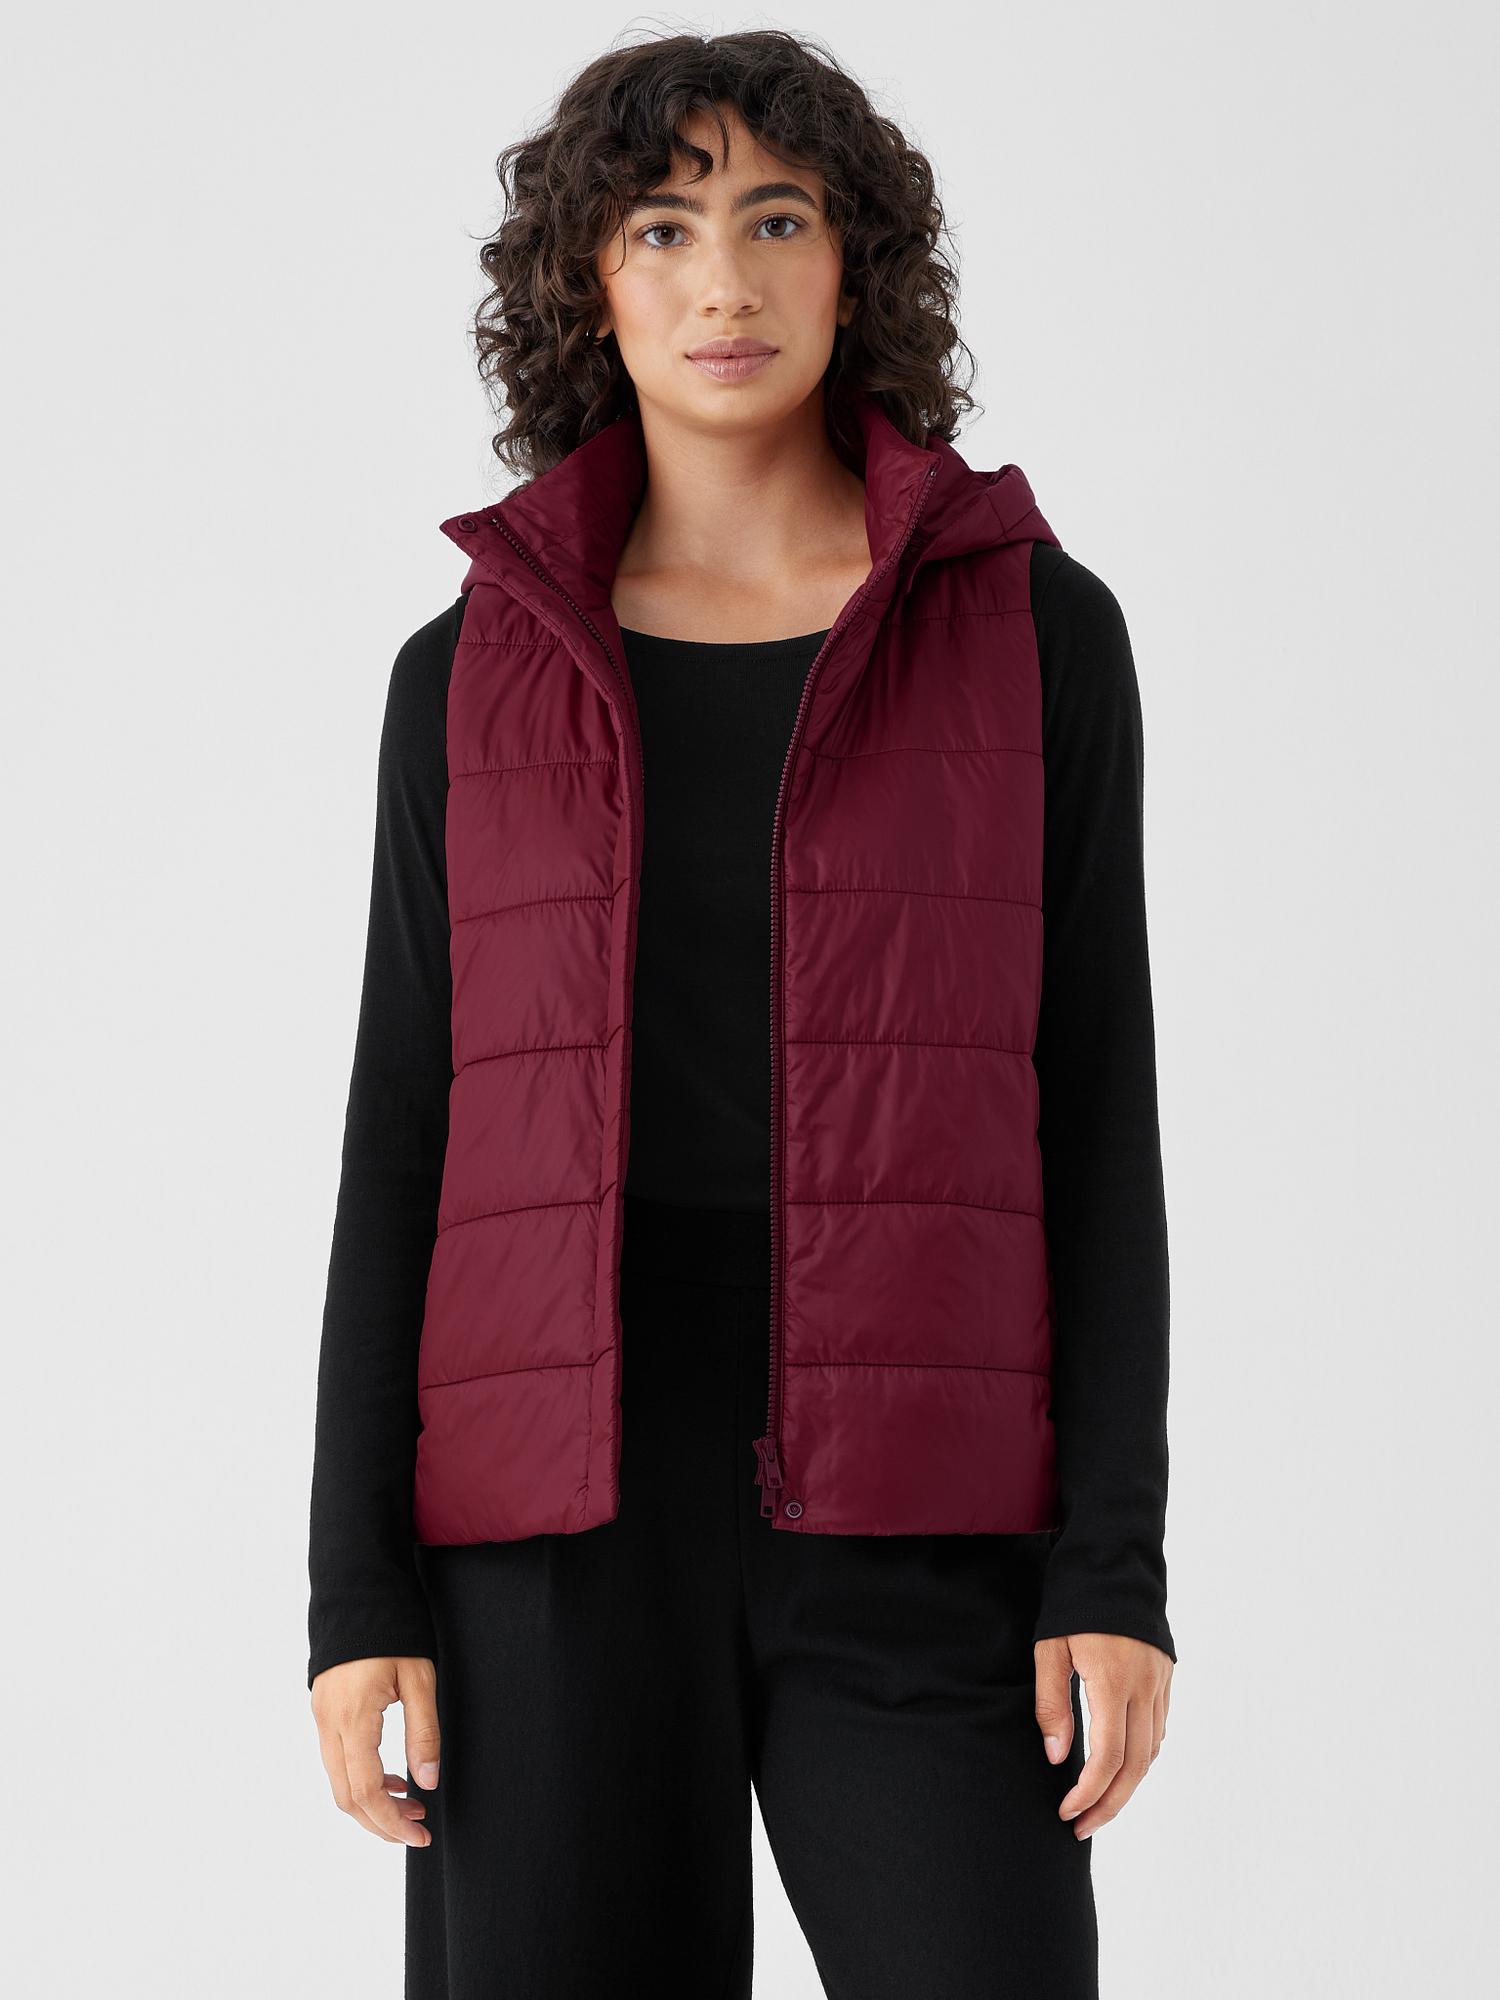 Eileen Fisher Eggshell Recycled Nylon Vest With Removable Hood in Red | Lyst